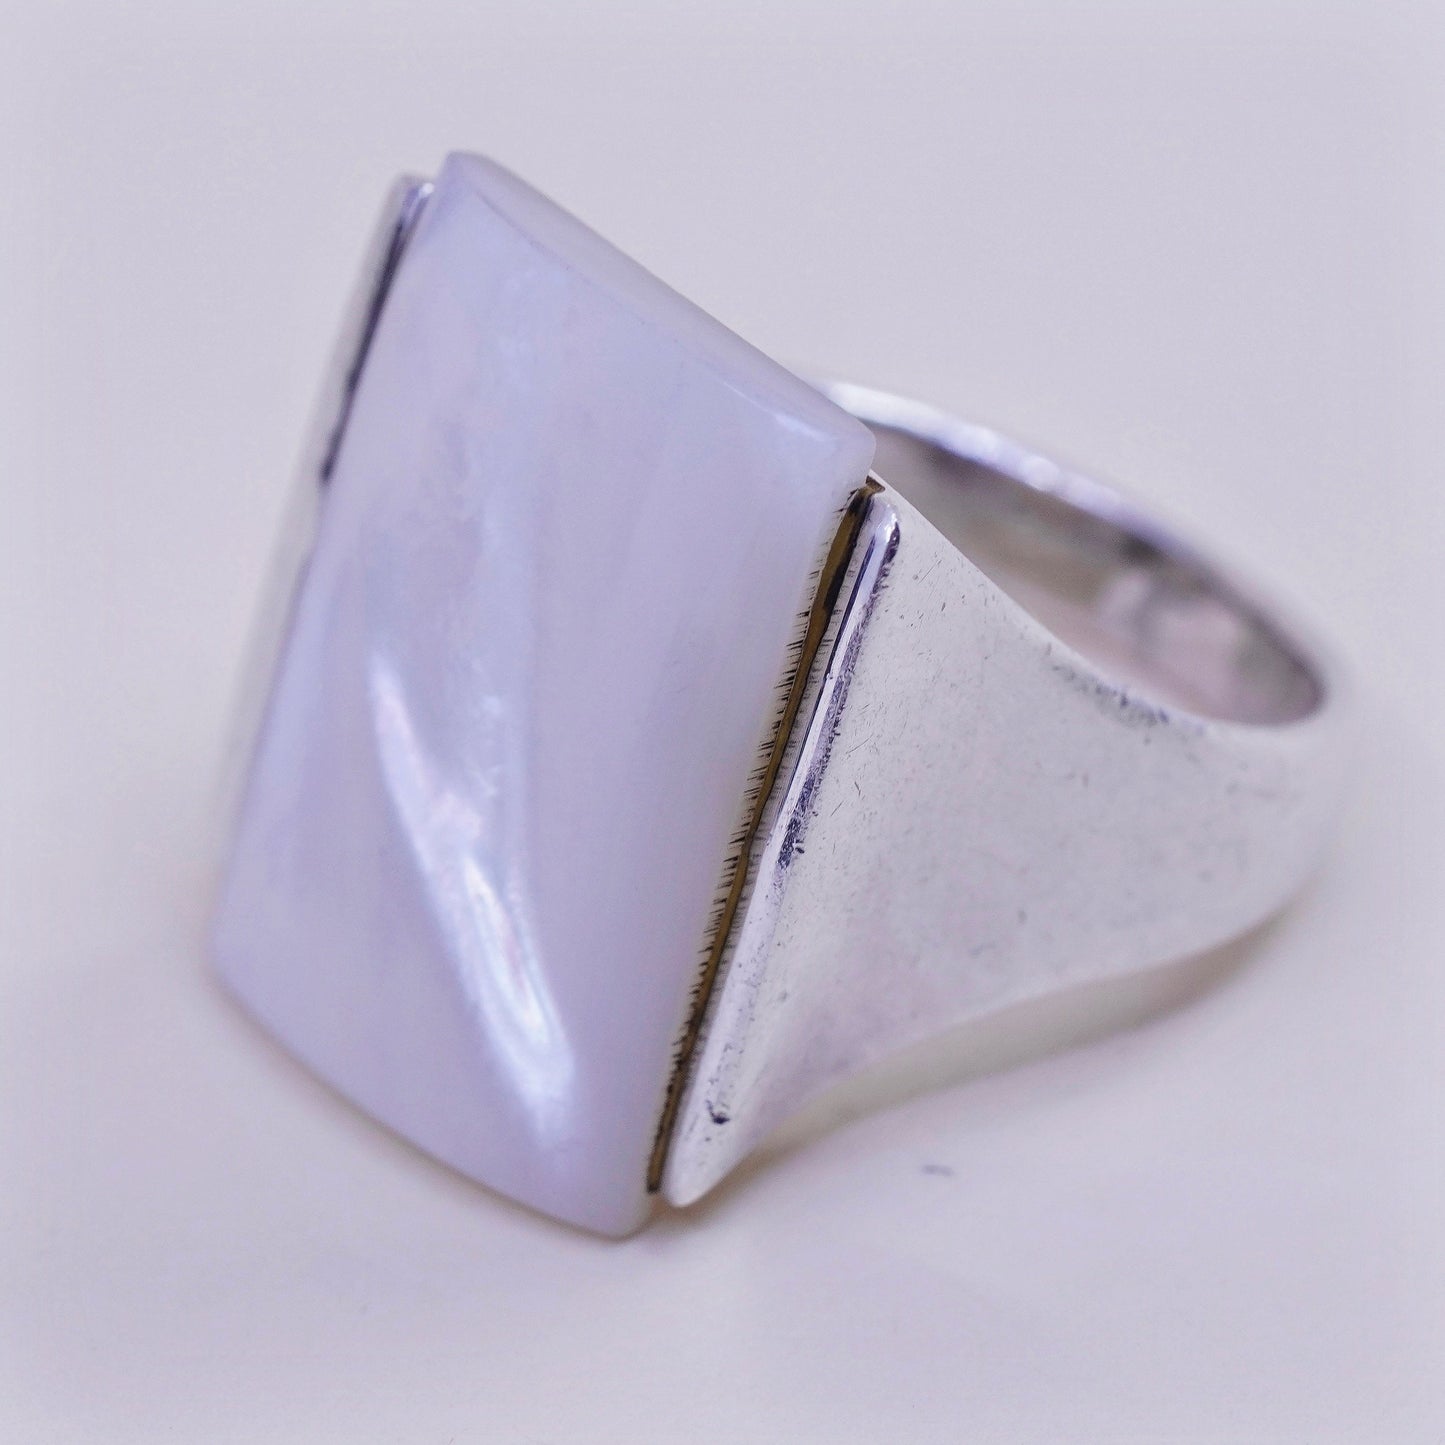 Size 9, sterling silver handmade ring mother of pearl, modern 925 cocktail band